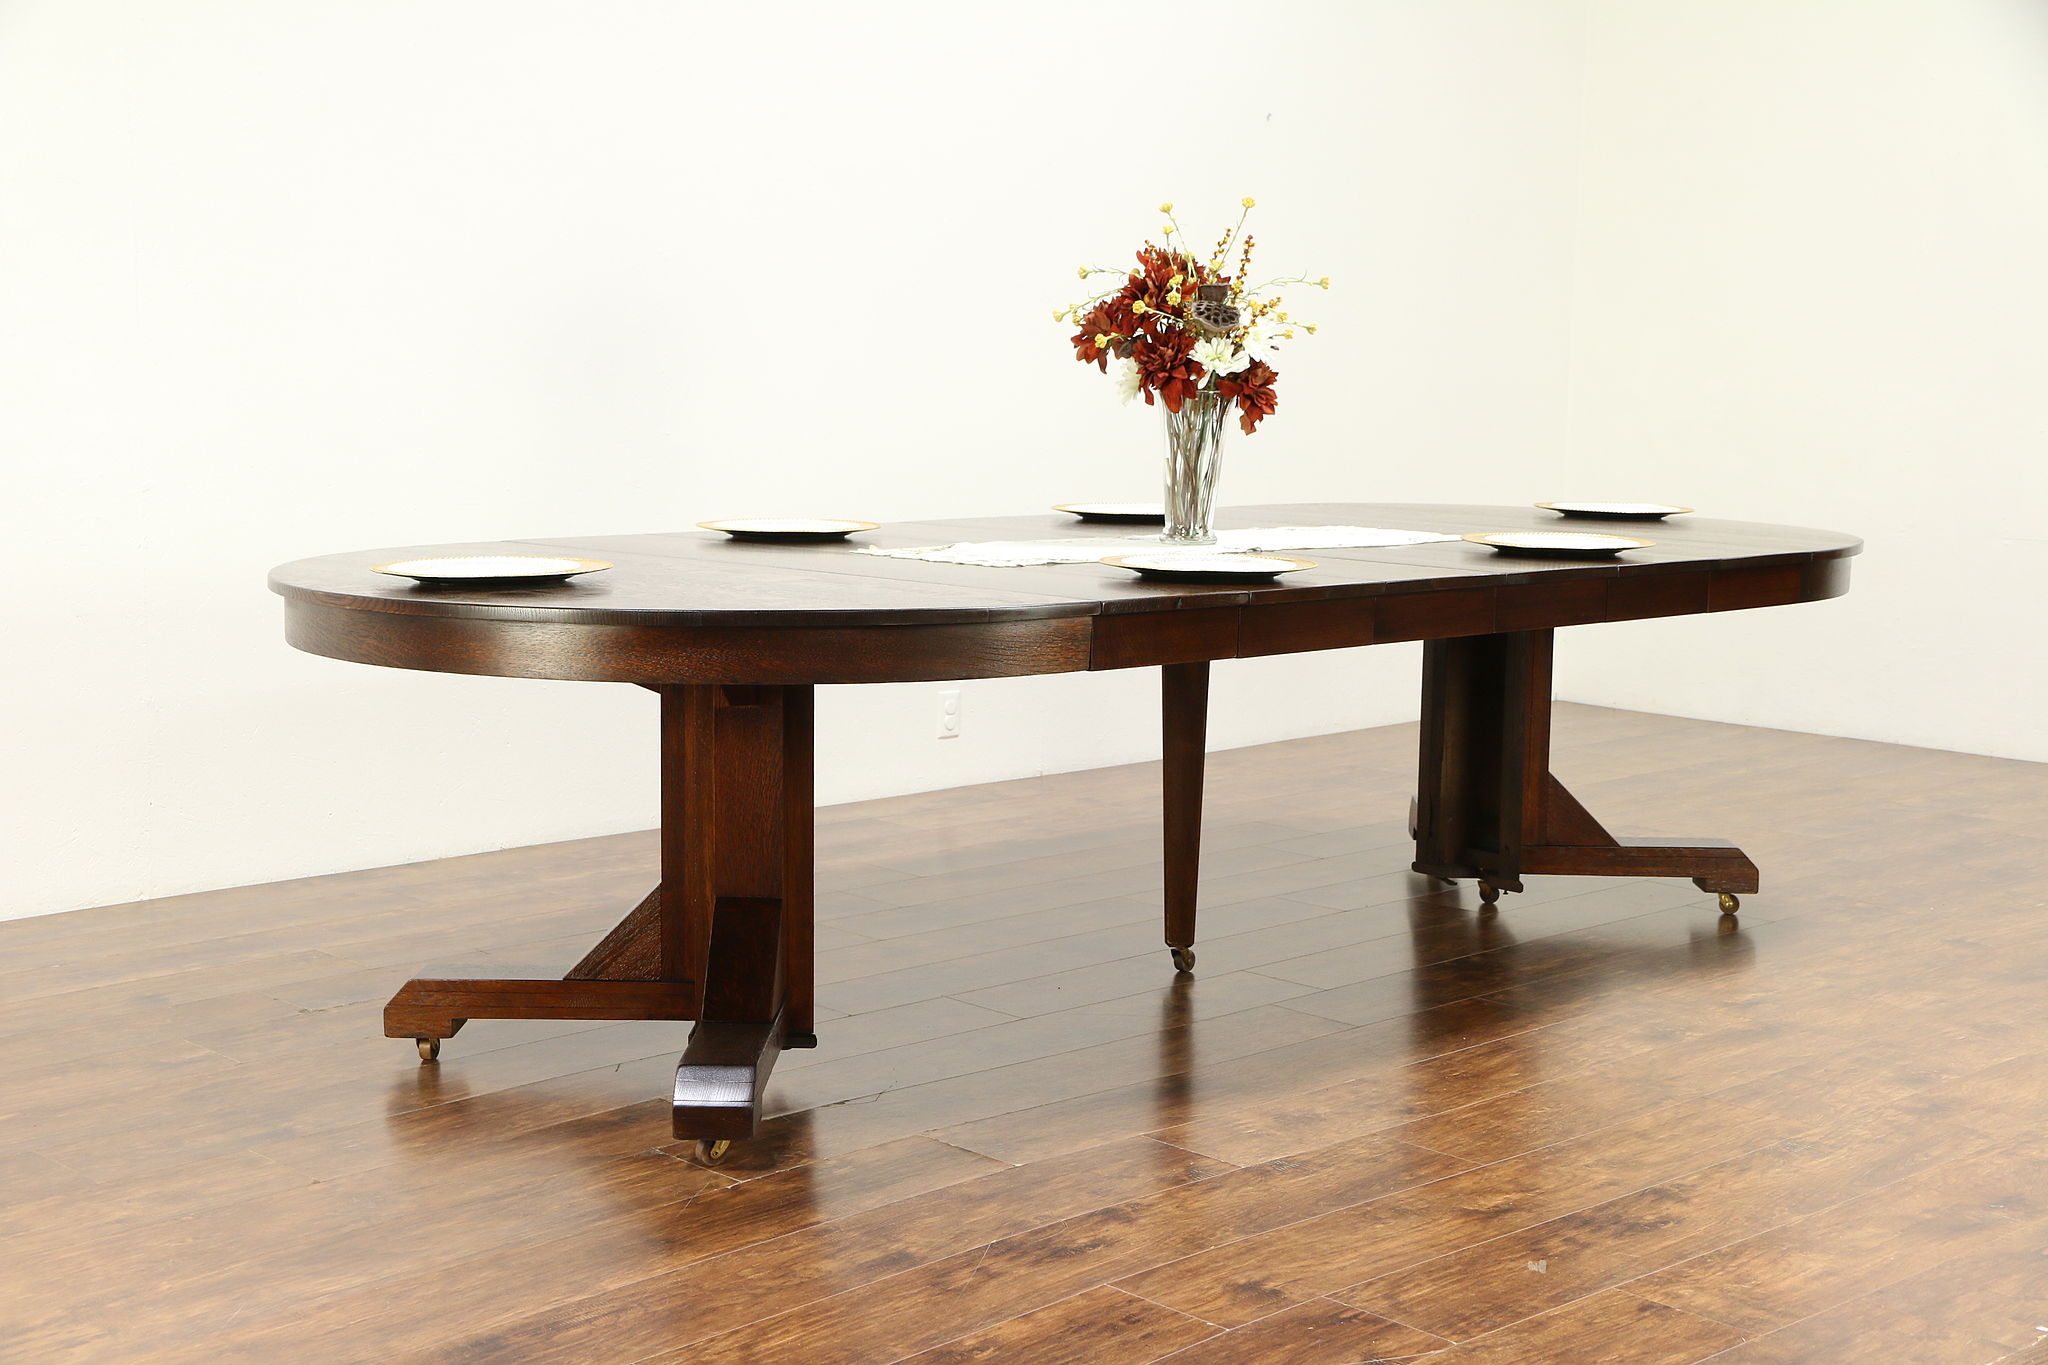 Sold Arts Crafts Mission Oak 56 Round Craftsman Antique Dining Table 10 7 30344 Harp Gallery Antiques Furniture